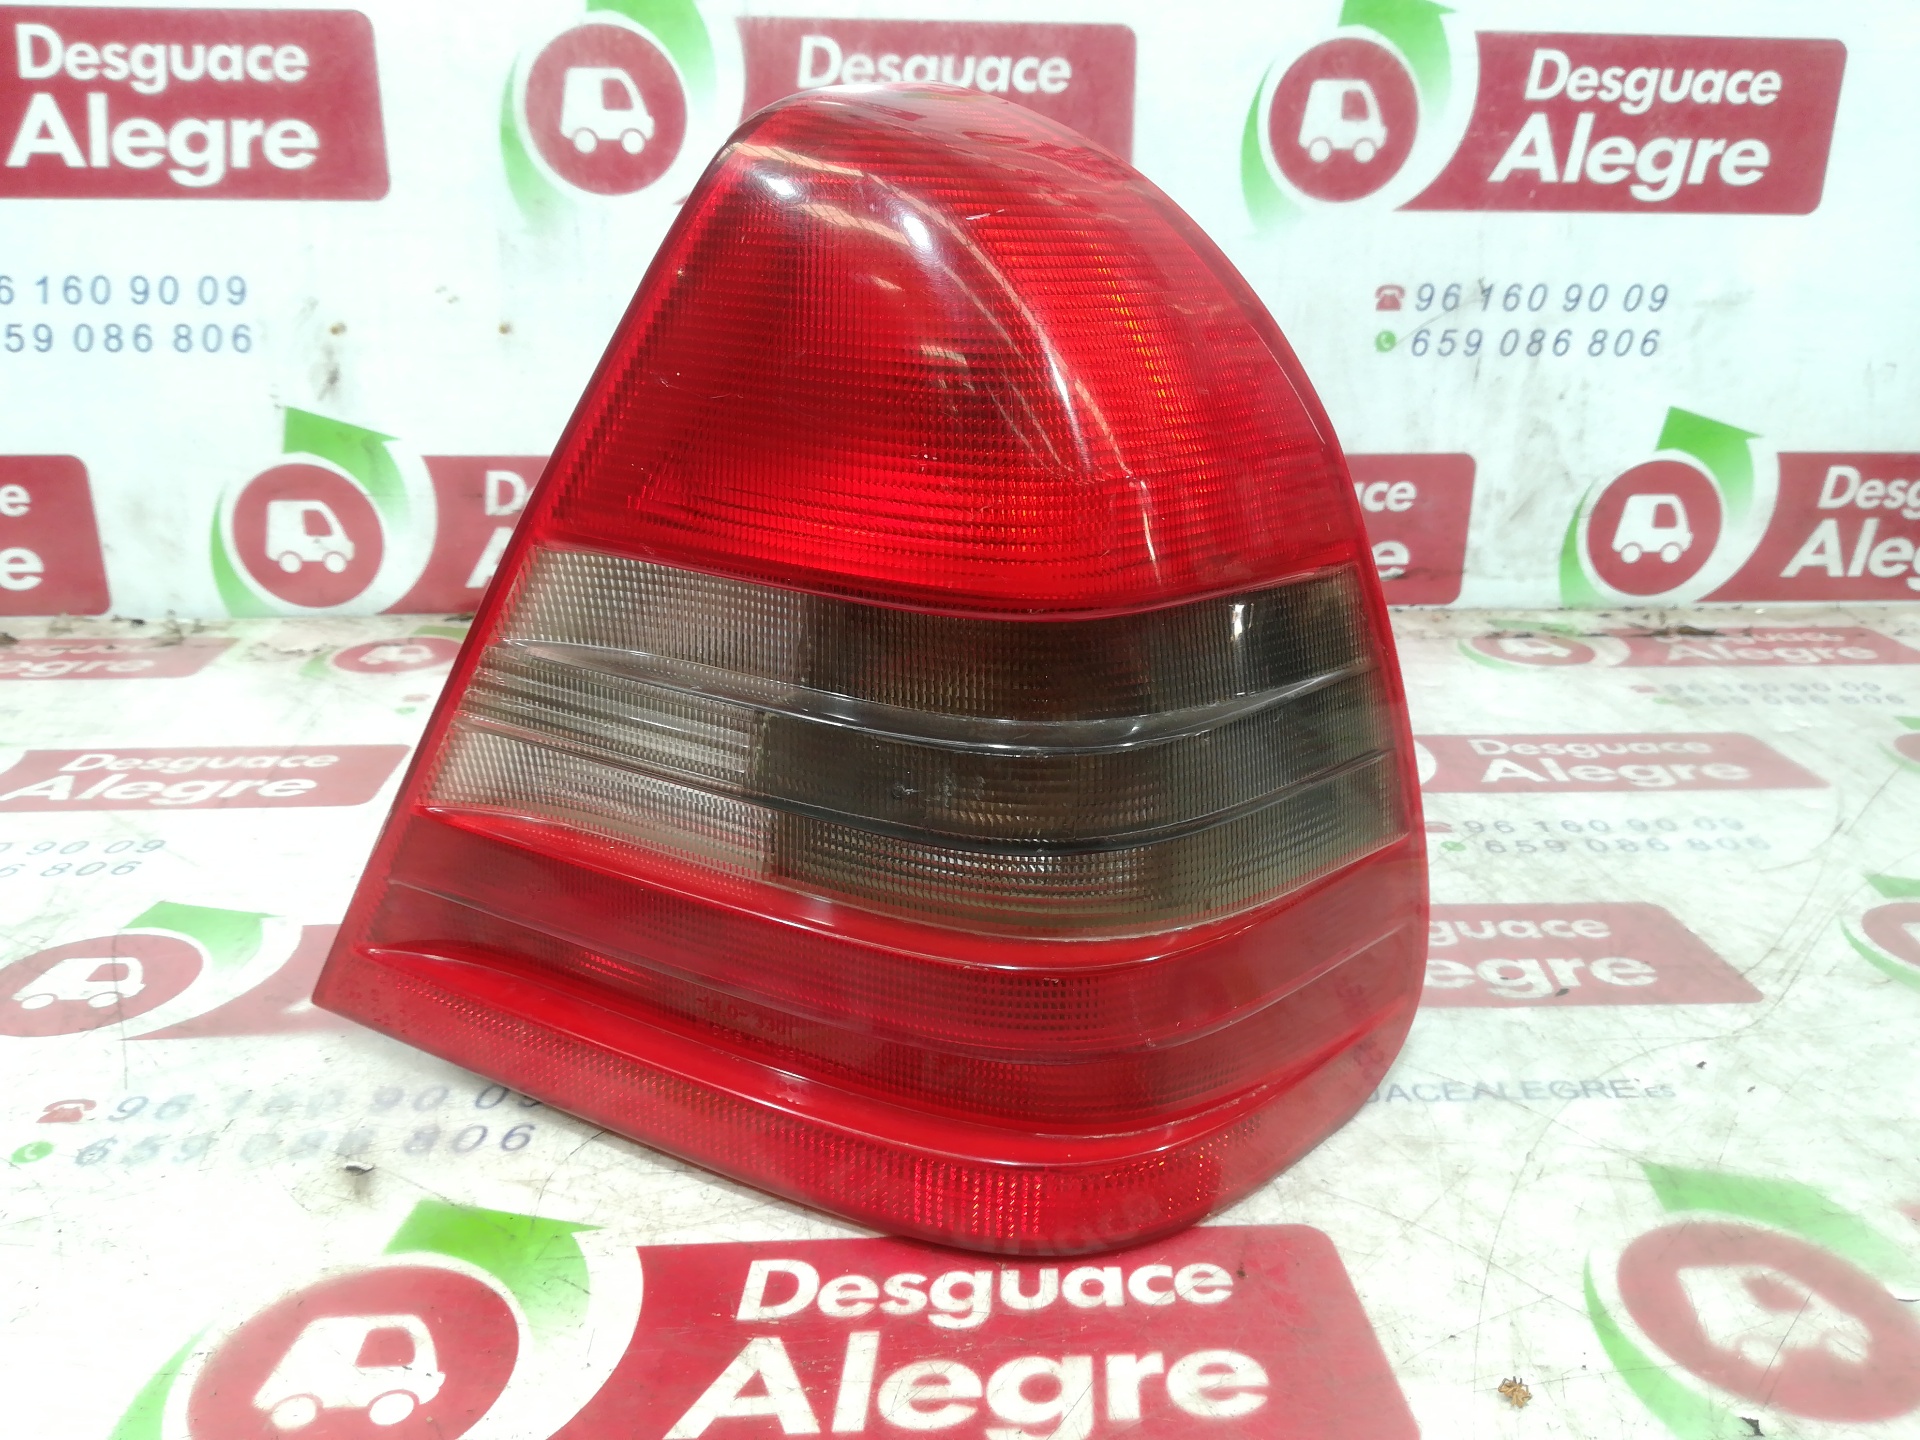 MERCEDES-BENZ C-Class W202/S202 (1993-2001) Rear Right Taillight Lamp 2028201064R 24812251